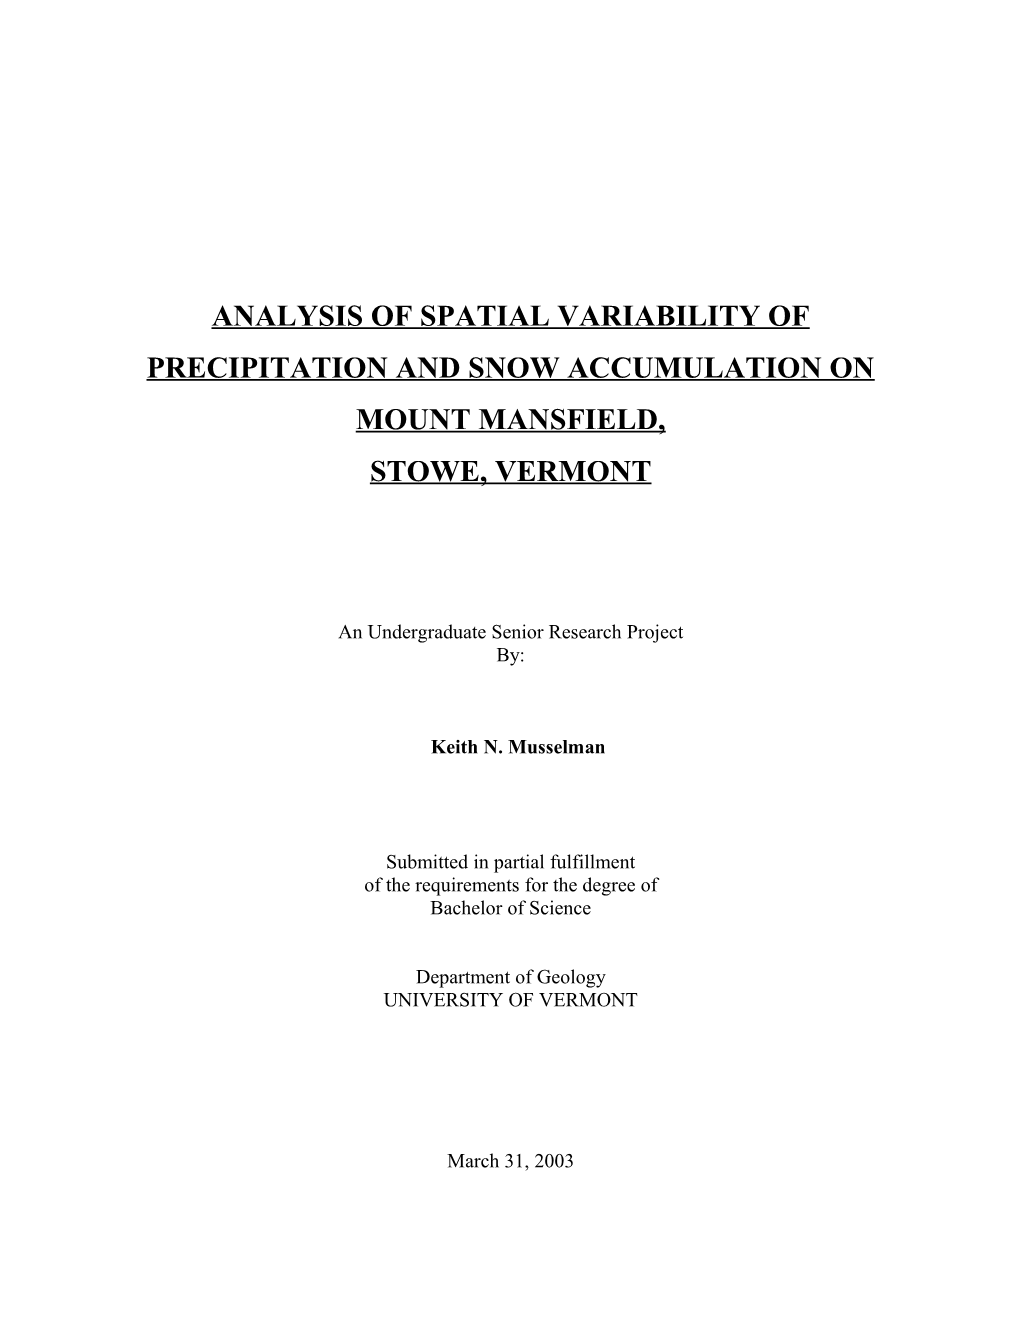 Analysis of Spatial Variability of Precipitation and Snow Accumulation on Mount Mansfield